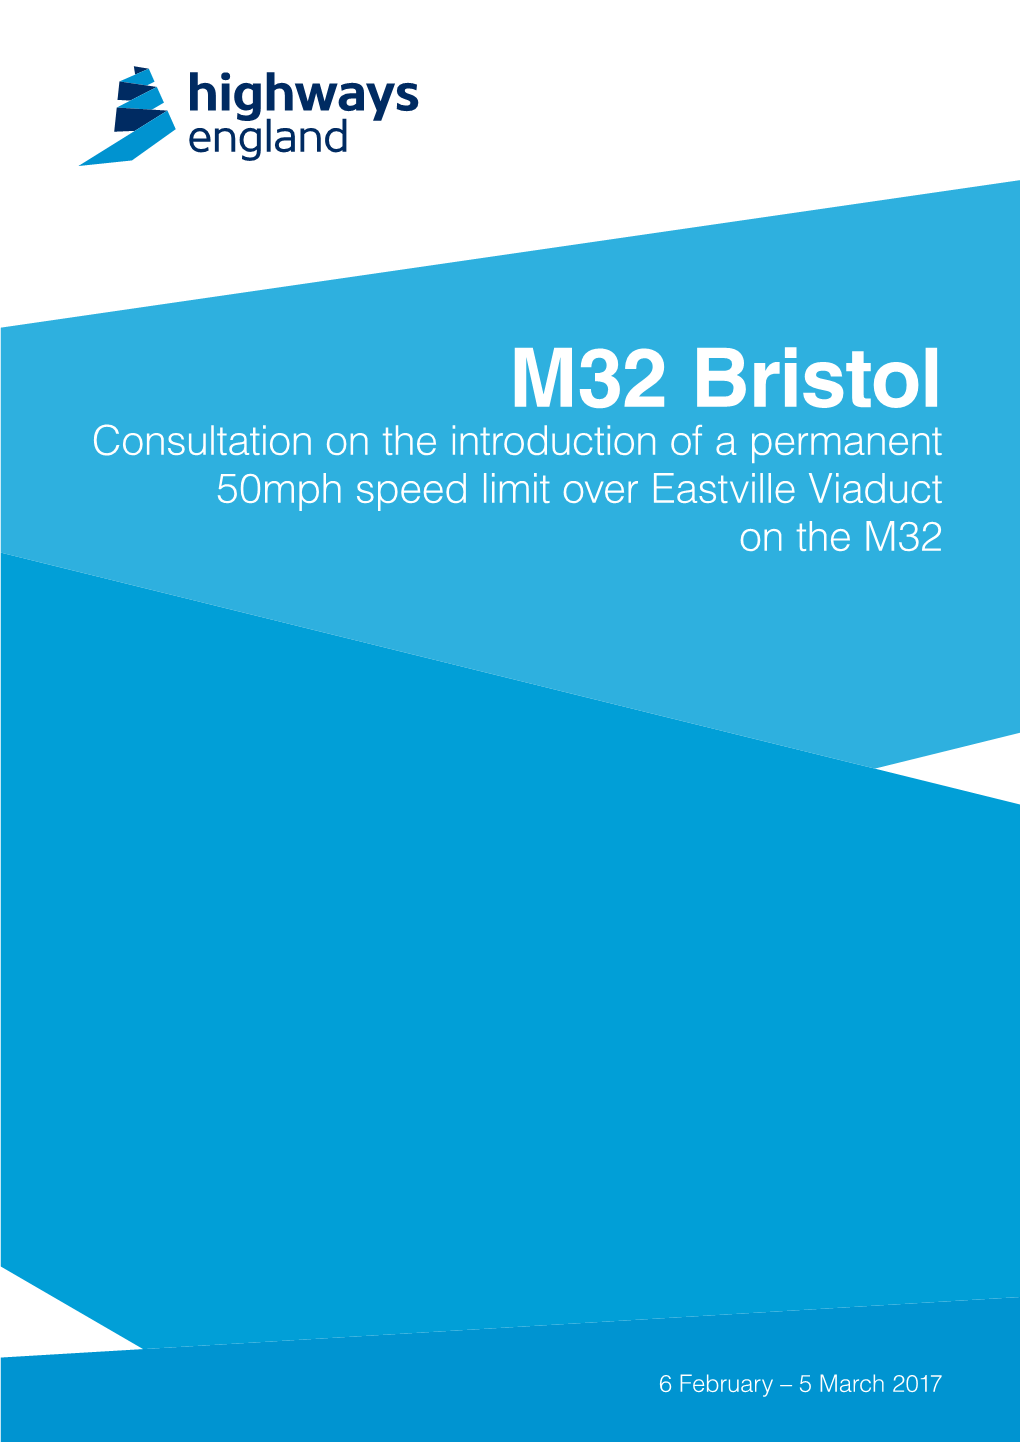 M32 Bristol Consultation on the Introduction of a Permanent 50Mph Speed Limit Over Eastville Viaduct on the M32